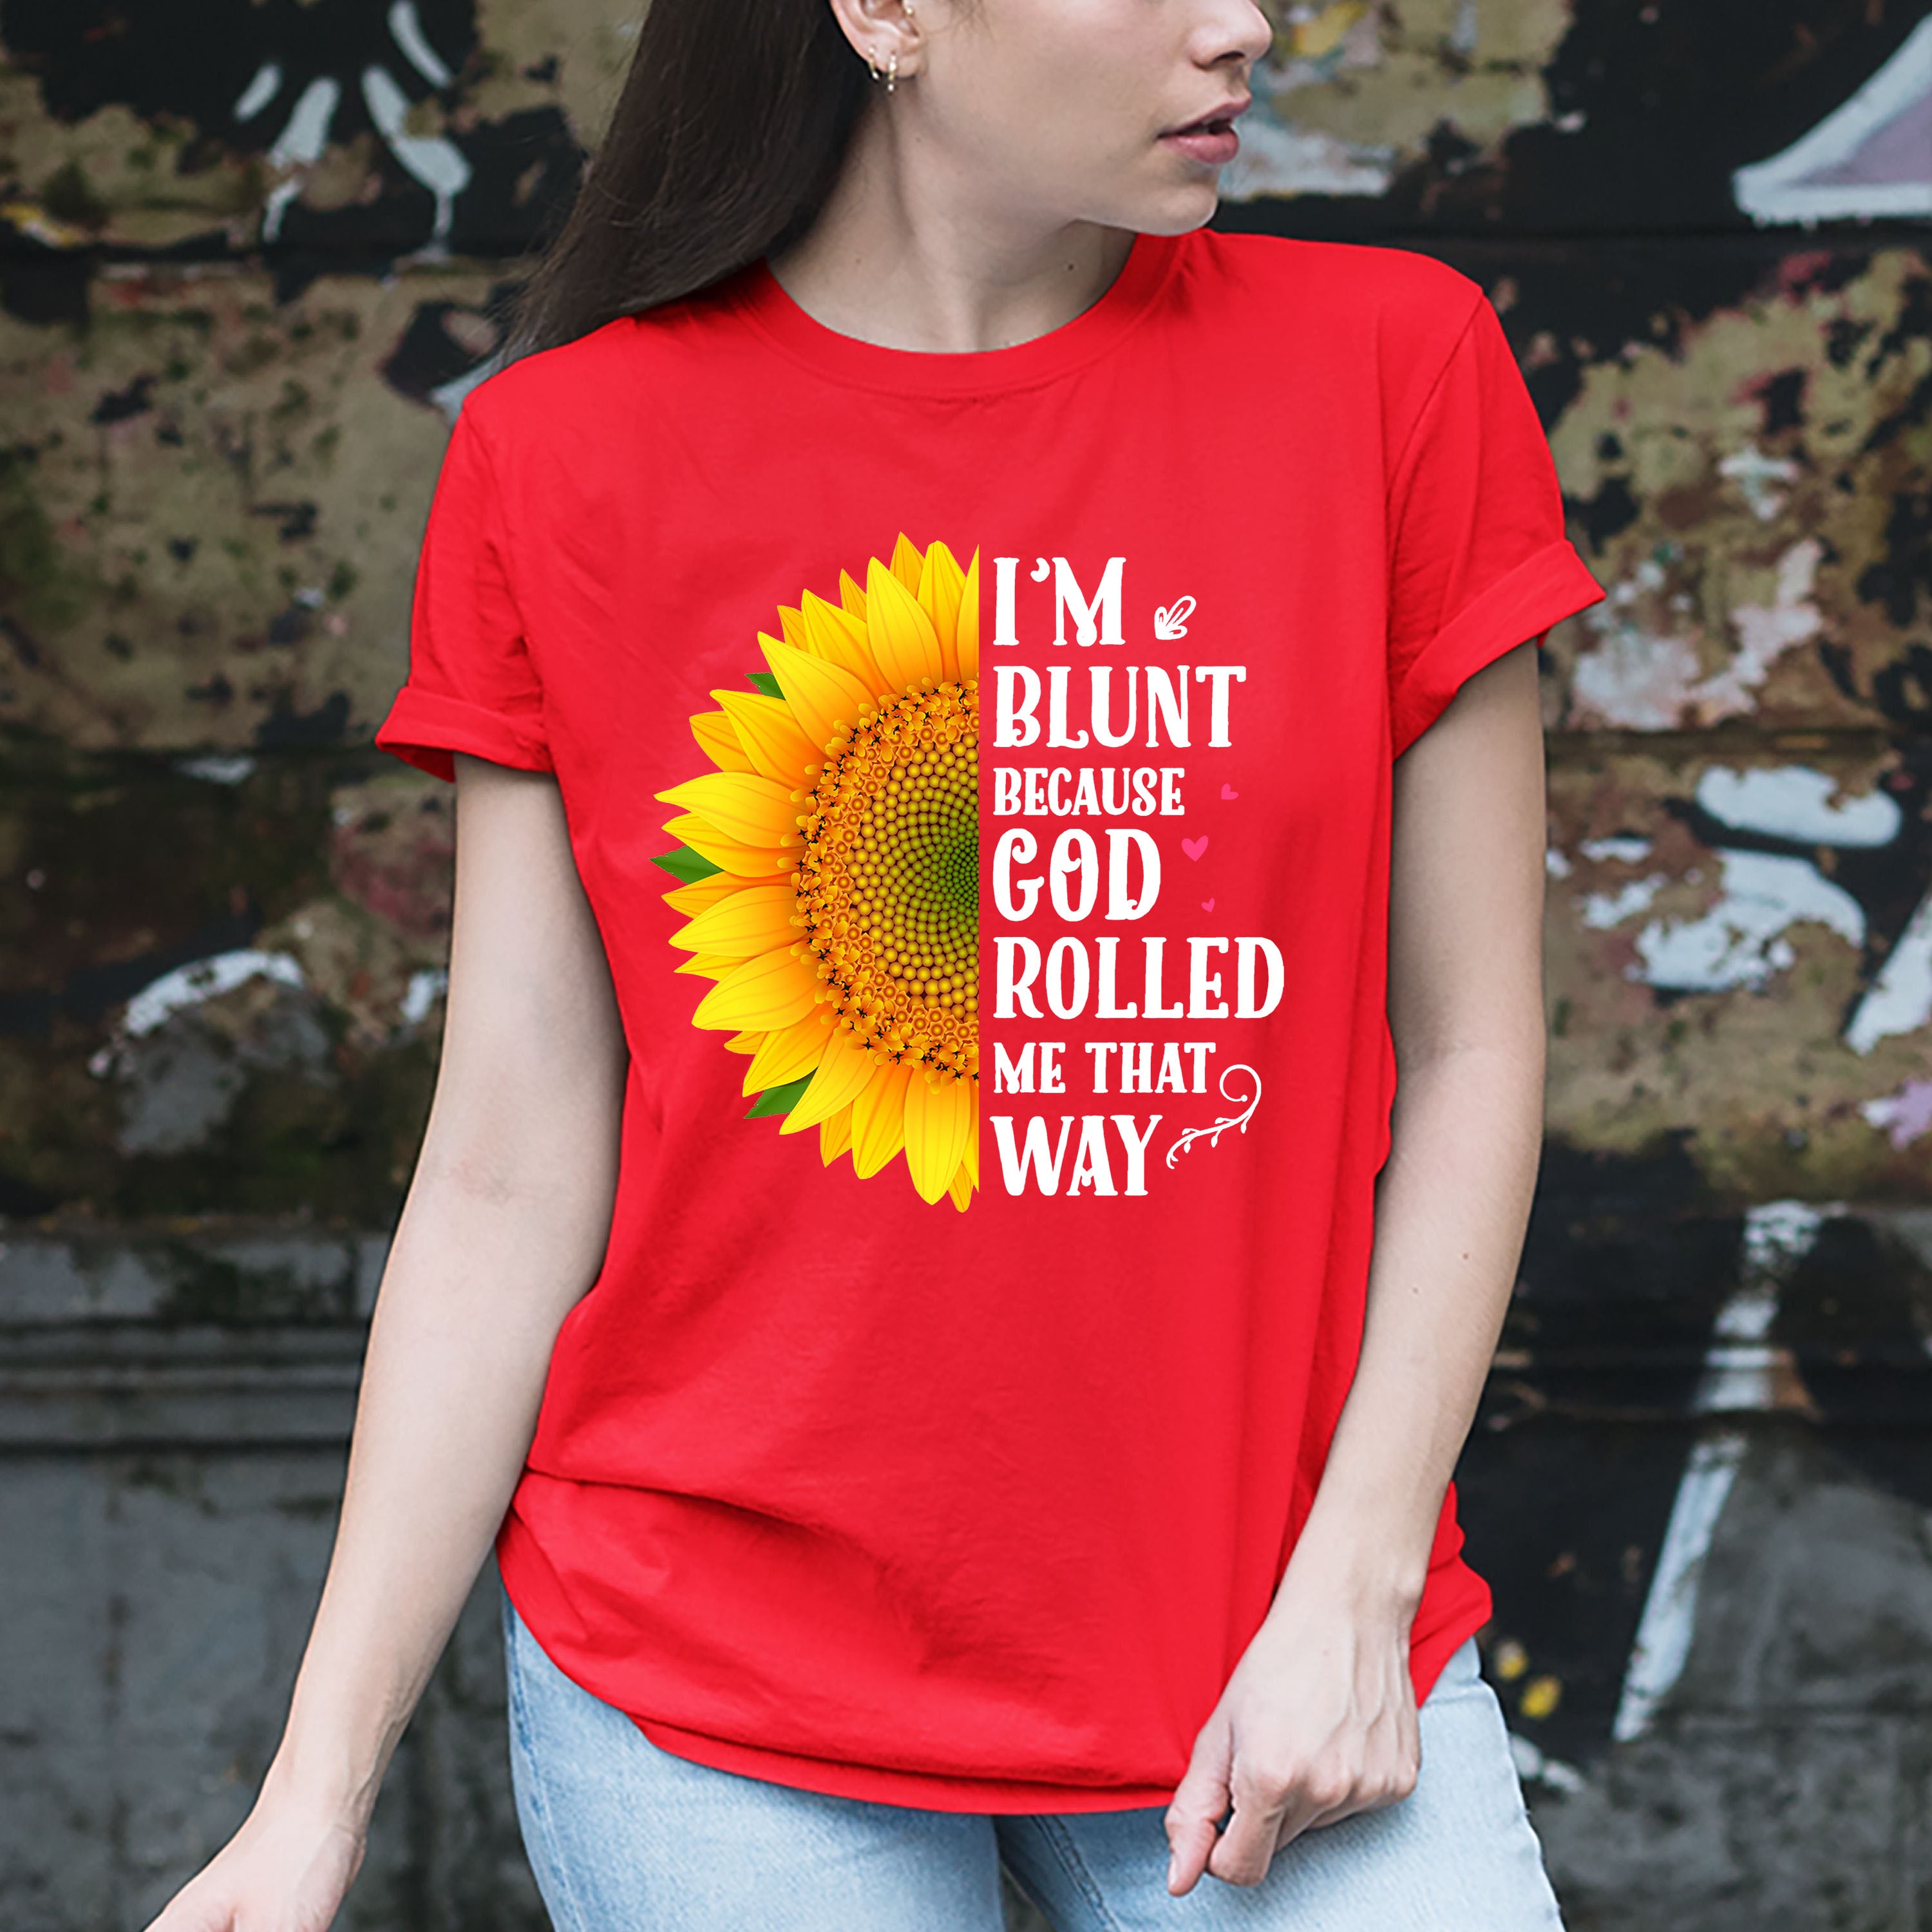 "I'M BLUNT BECAUSE GOD ROLLED ME THAT WAY''UNISEX FIT TEE